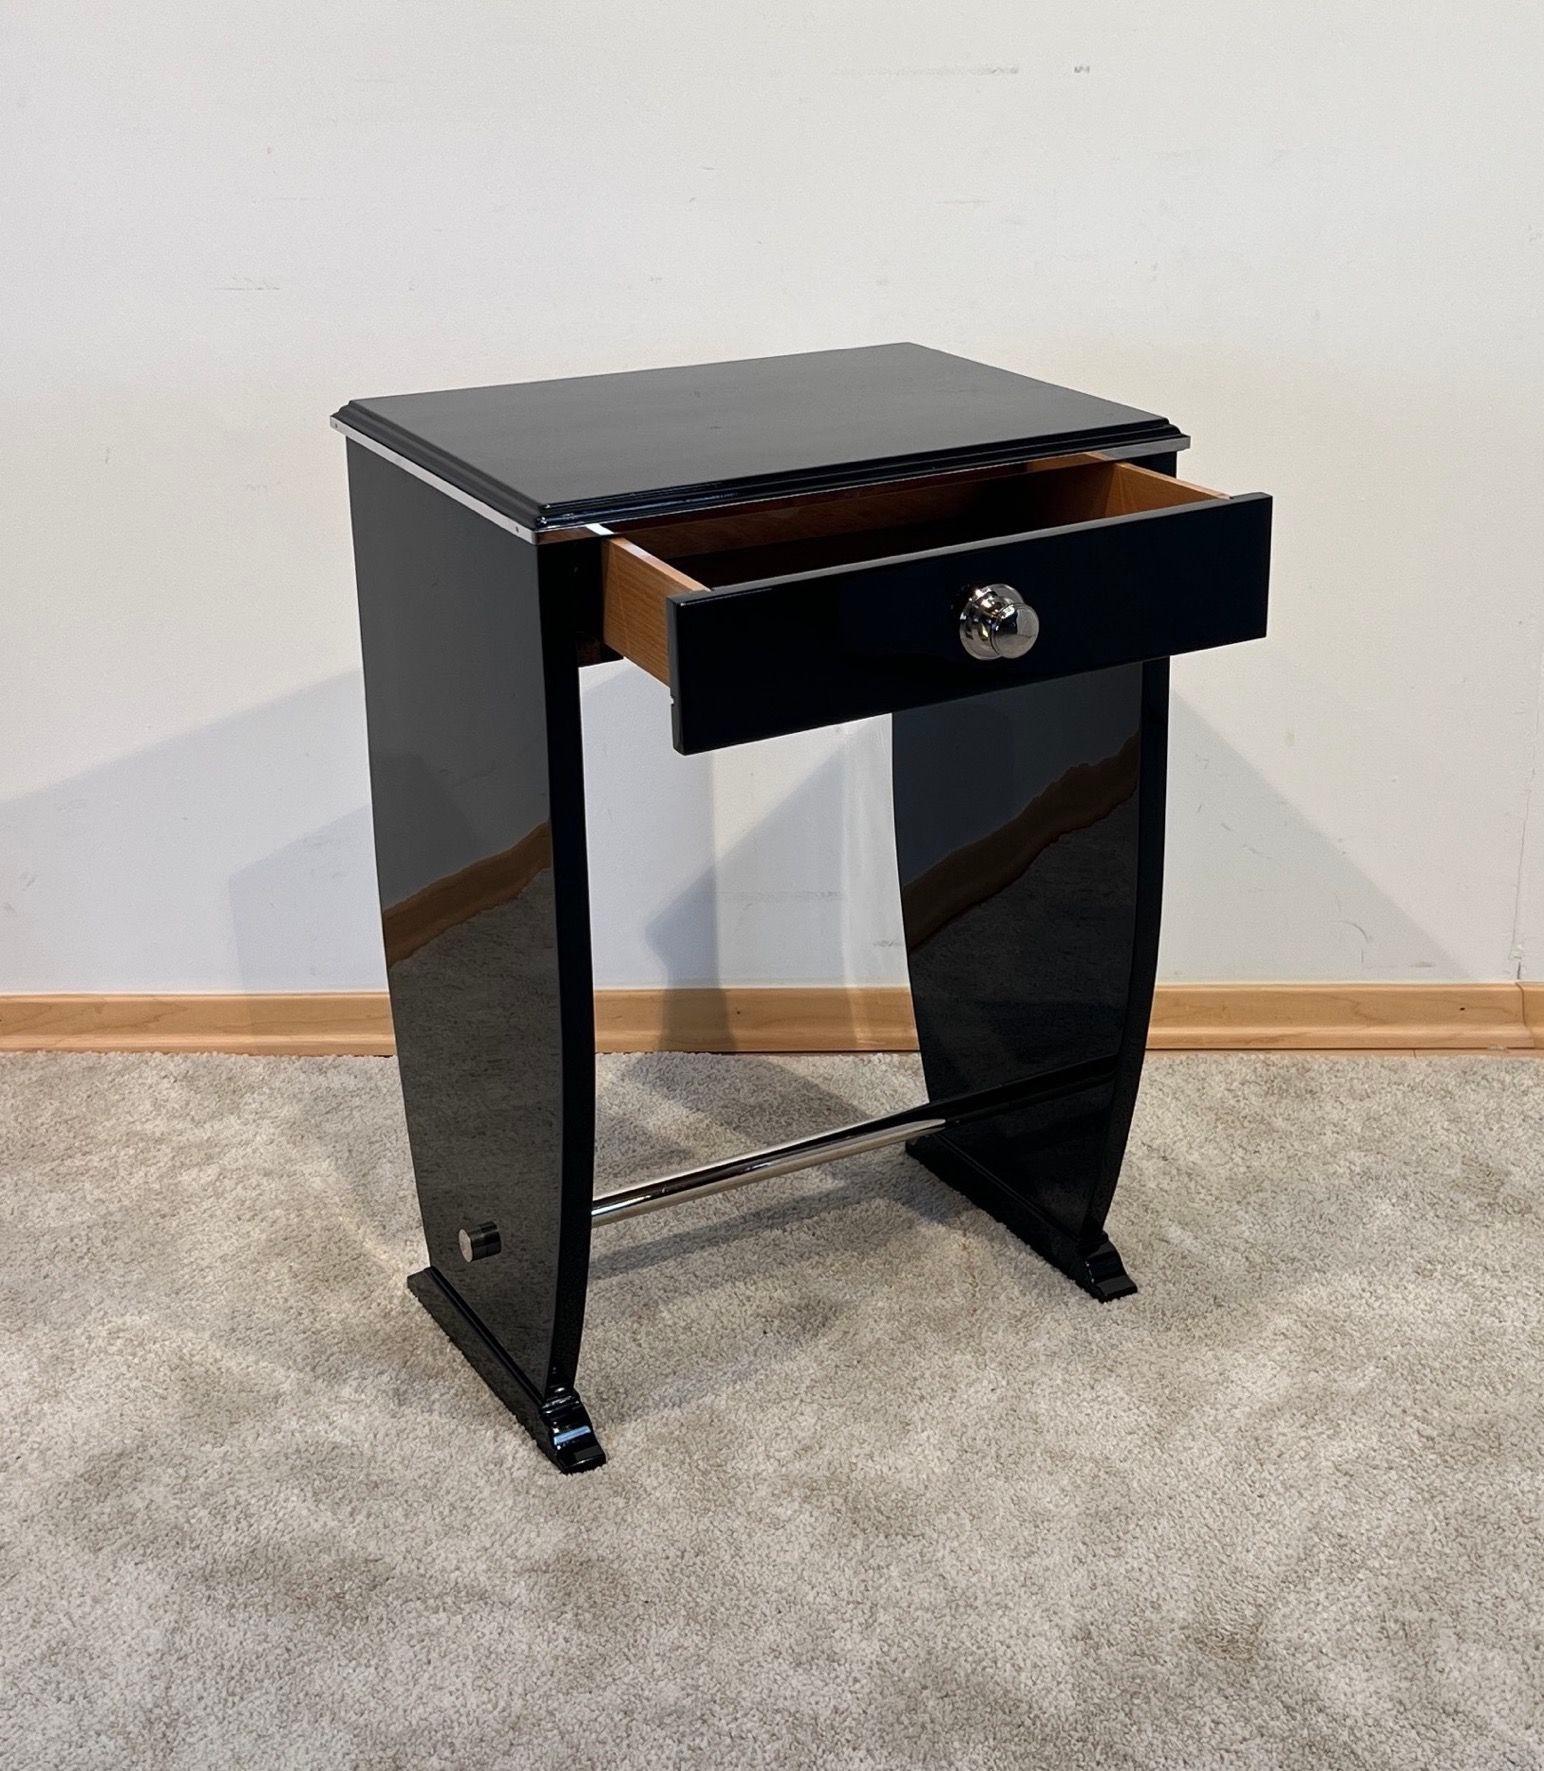 Art Deco Side Table with Drawer, Black Lacquer and Chrome, France circa 1930 In Good Condition For Sale In Regensburg, DE